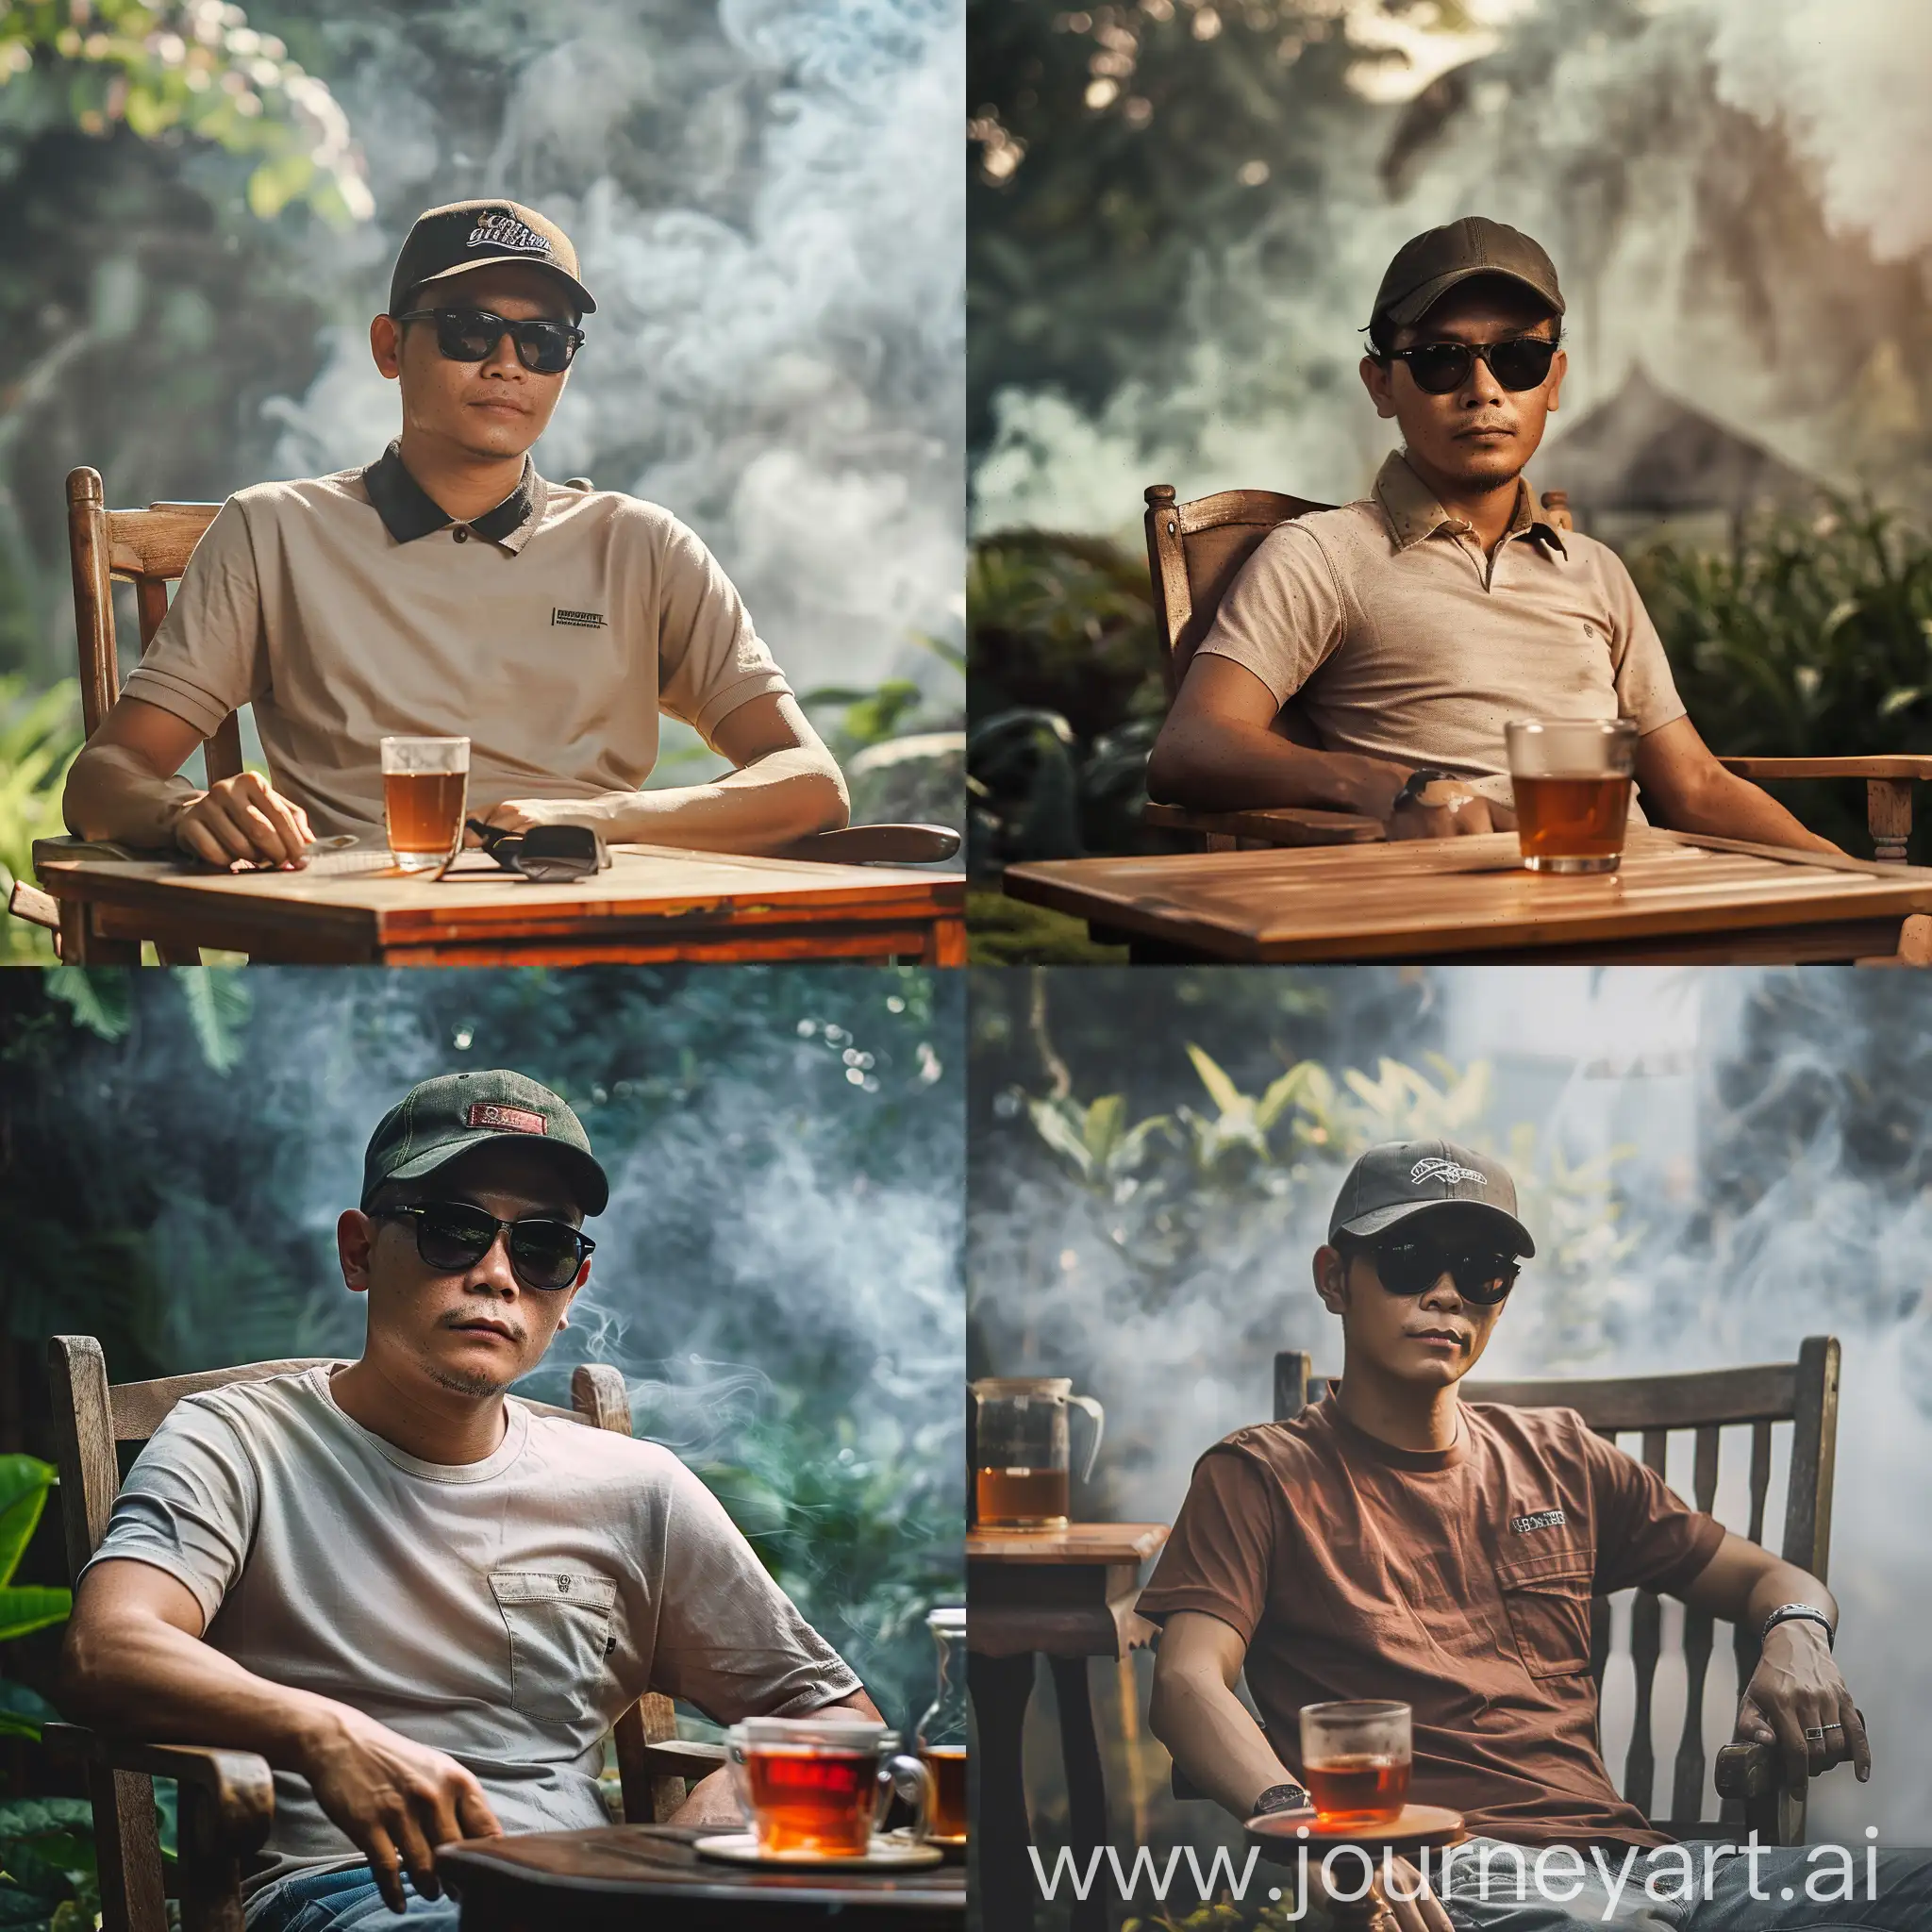 An Indonesian man, 35 years old, with a handsome clean face, wearing a baseball cap, black sunglasses, a Carvil collar t-shirt, sitting on a wooden chair with a glass of tea on the table, with a background of a tea garden and misty smoke, realistically HD. 